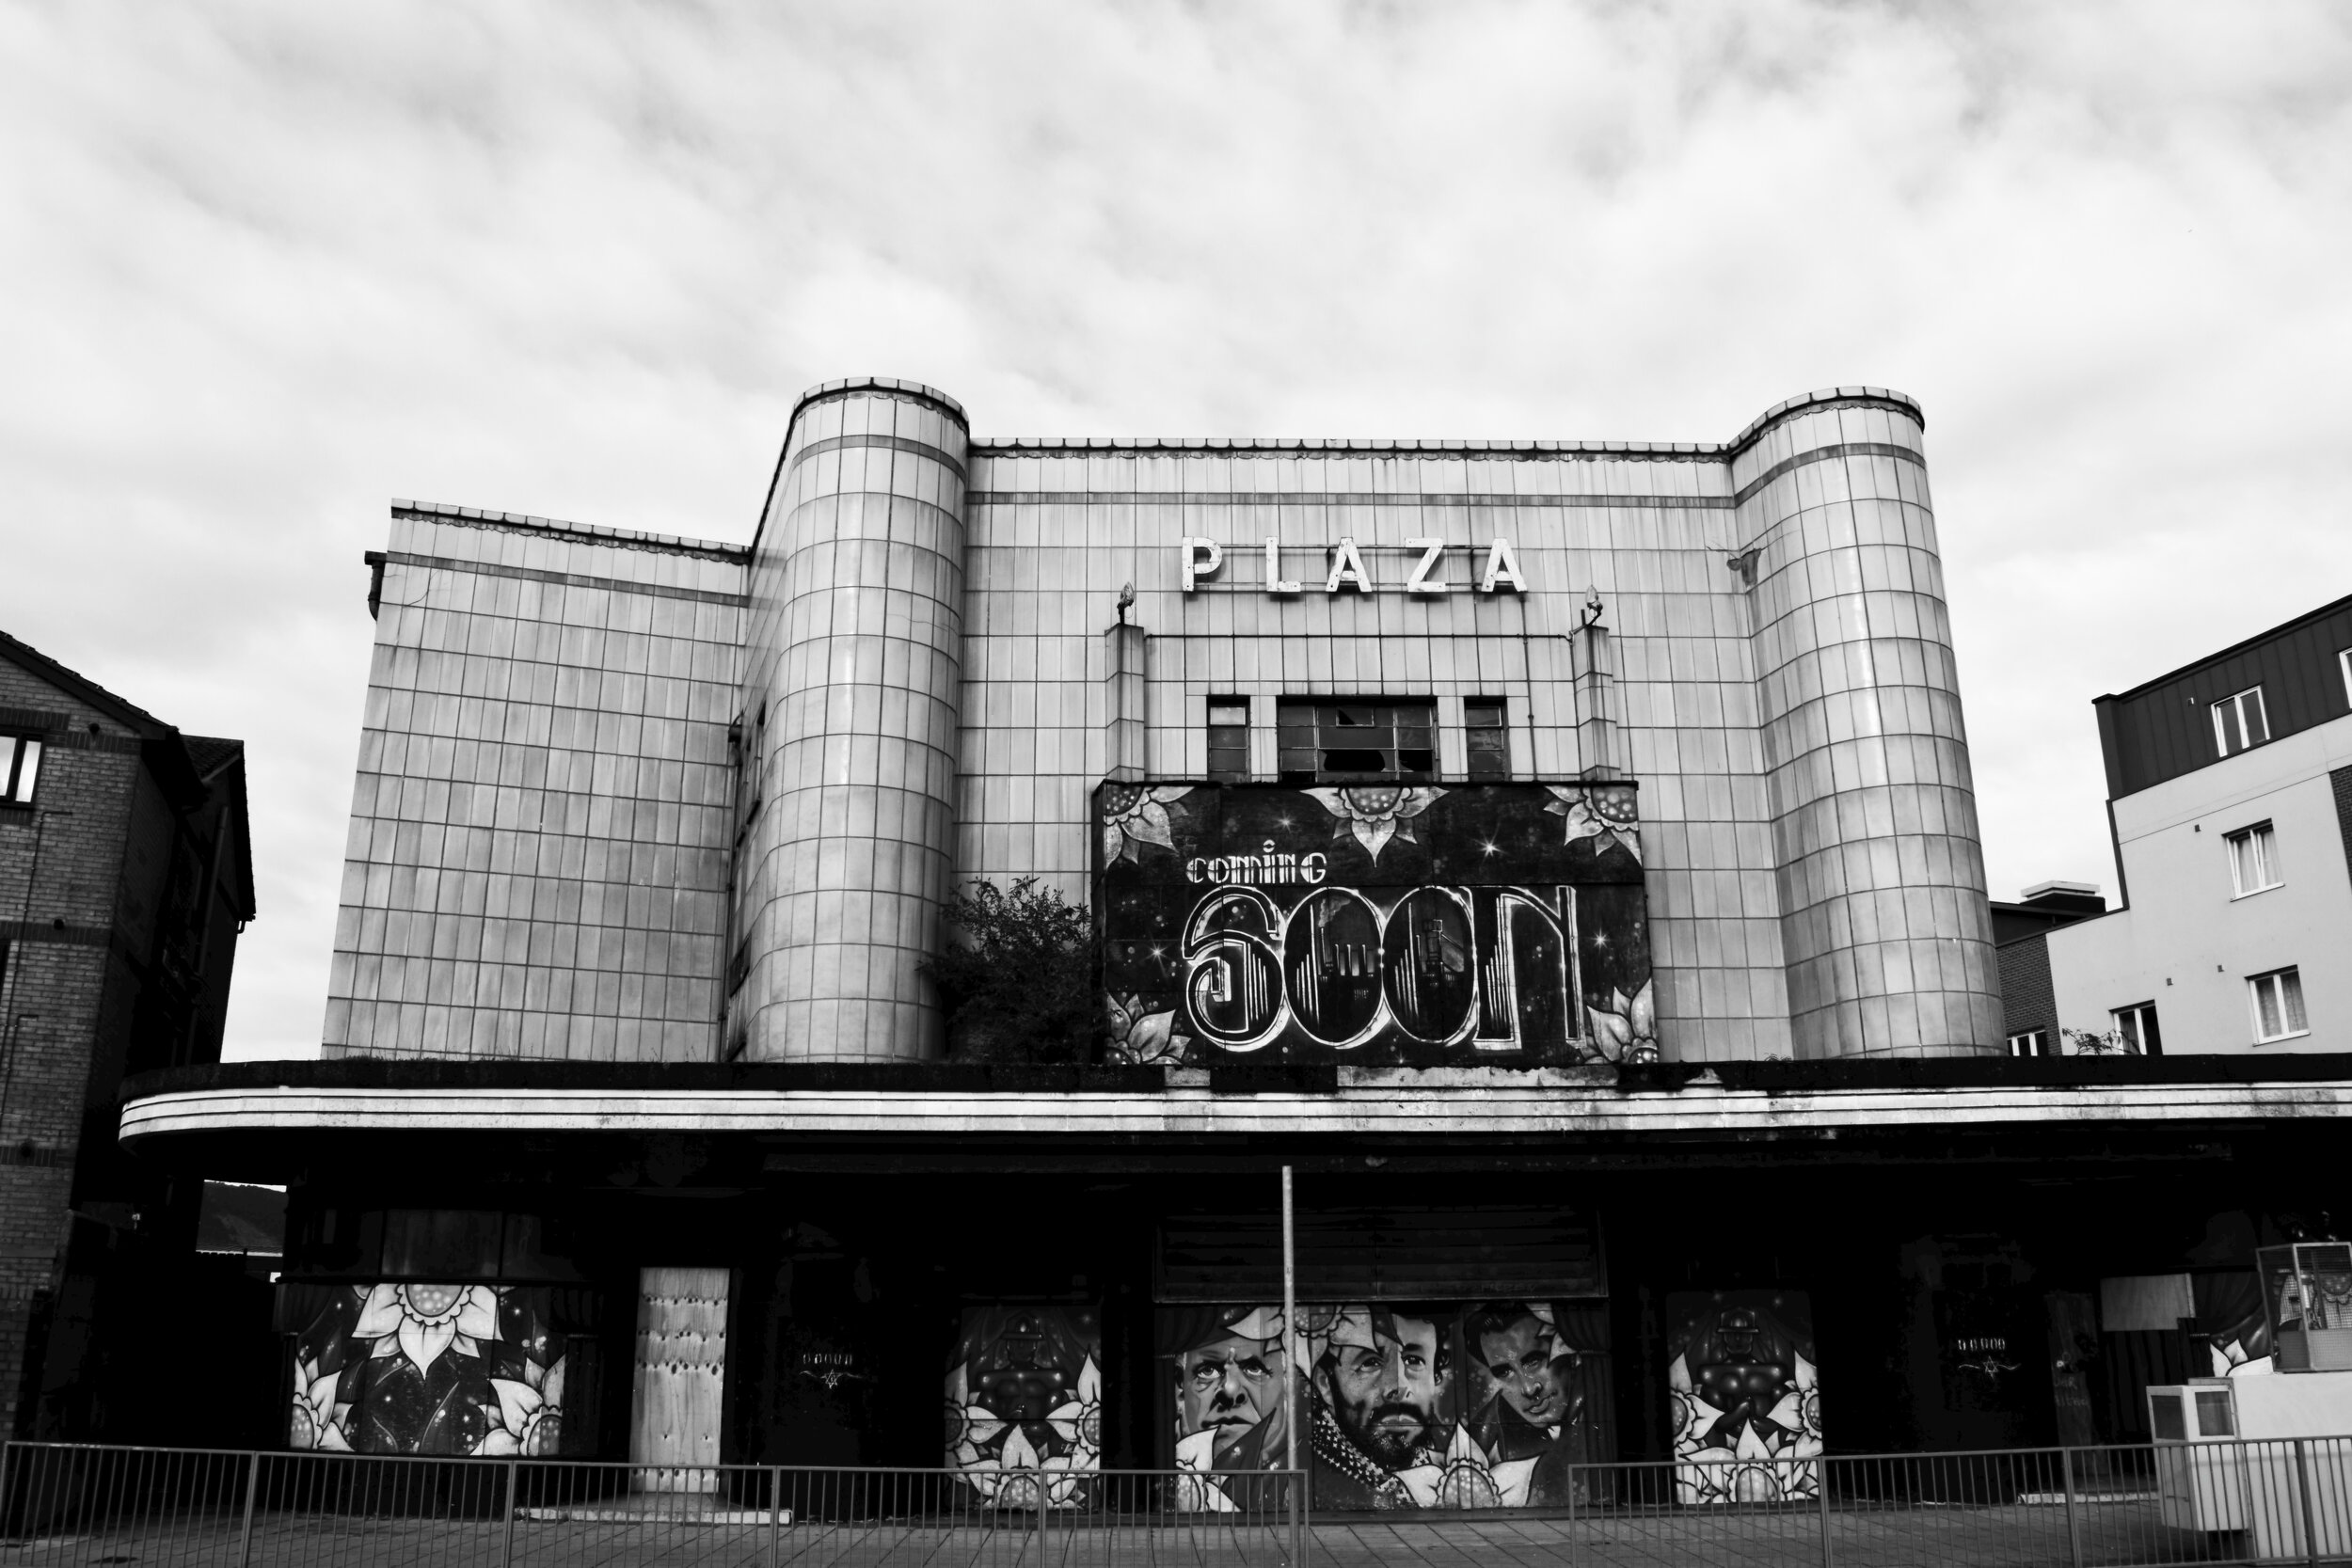 Port Talbot has received $356,000 from the Welsh Government to restore the Art Deco cinema Plaza that has been closed since 1999. The town is still searching for additional funding.